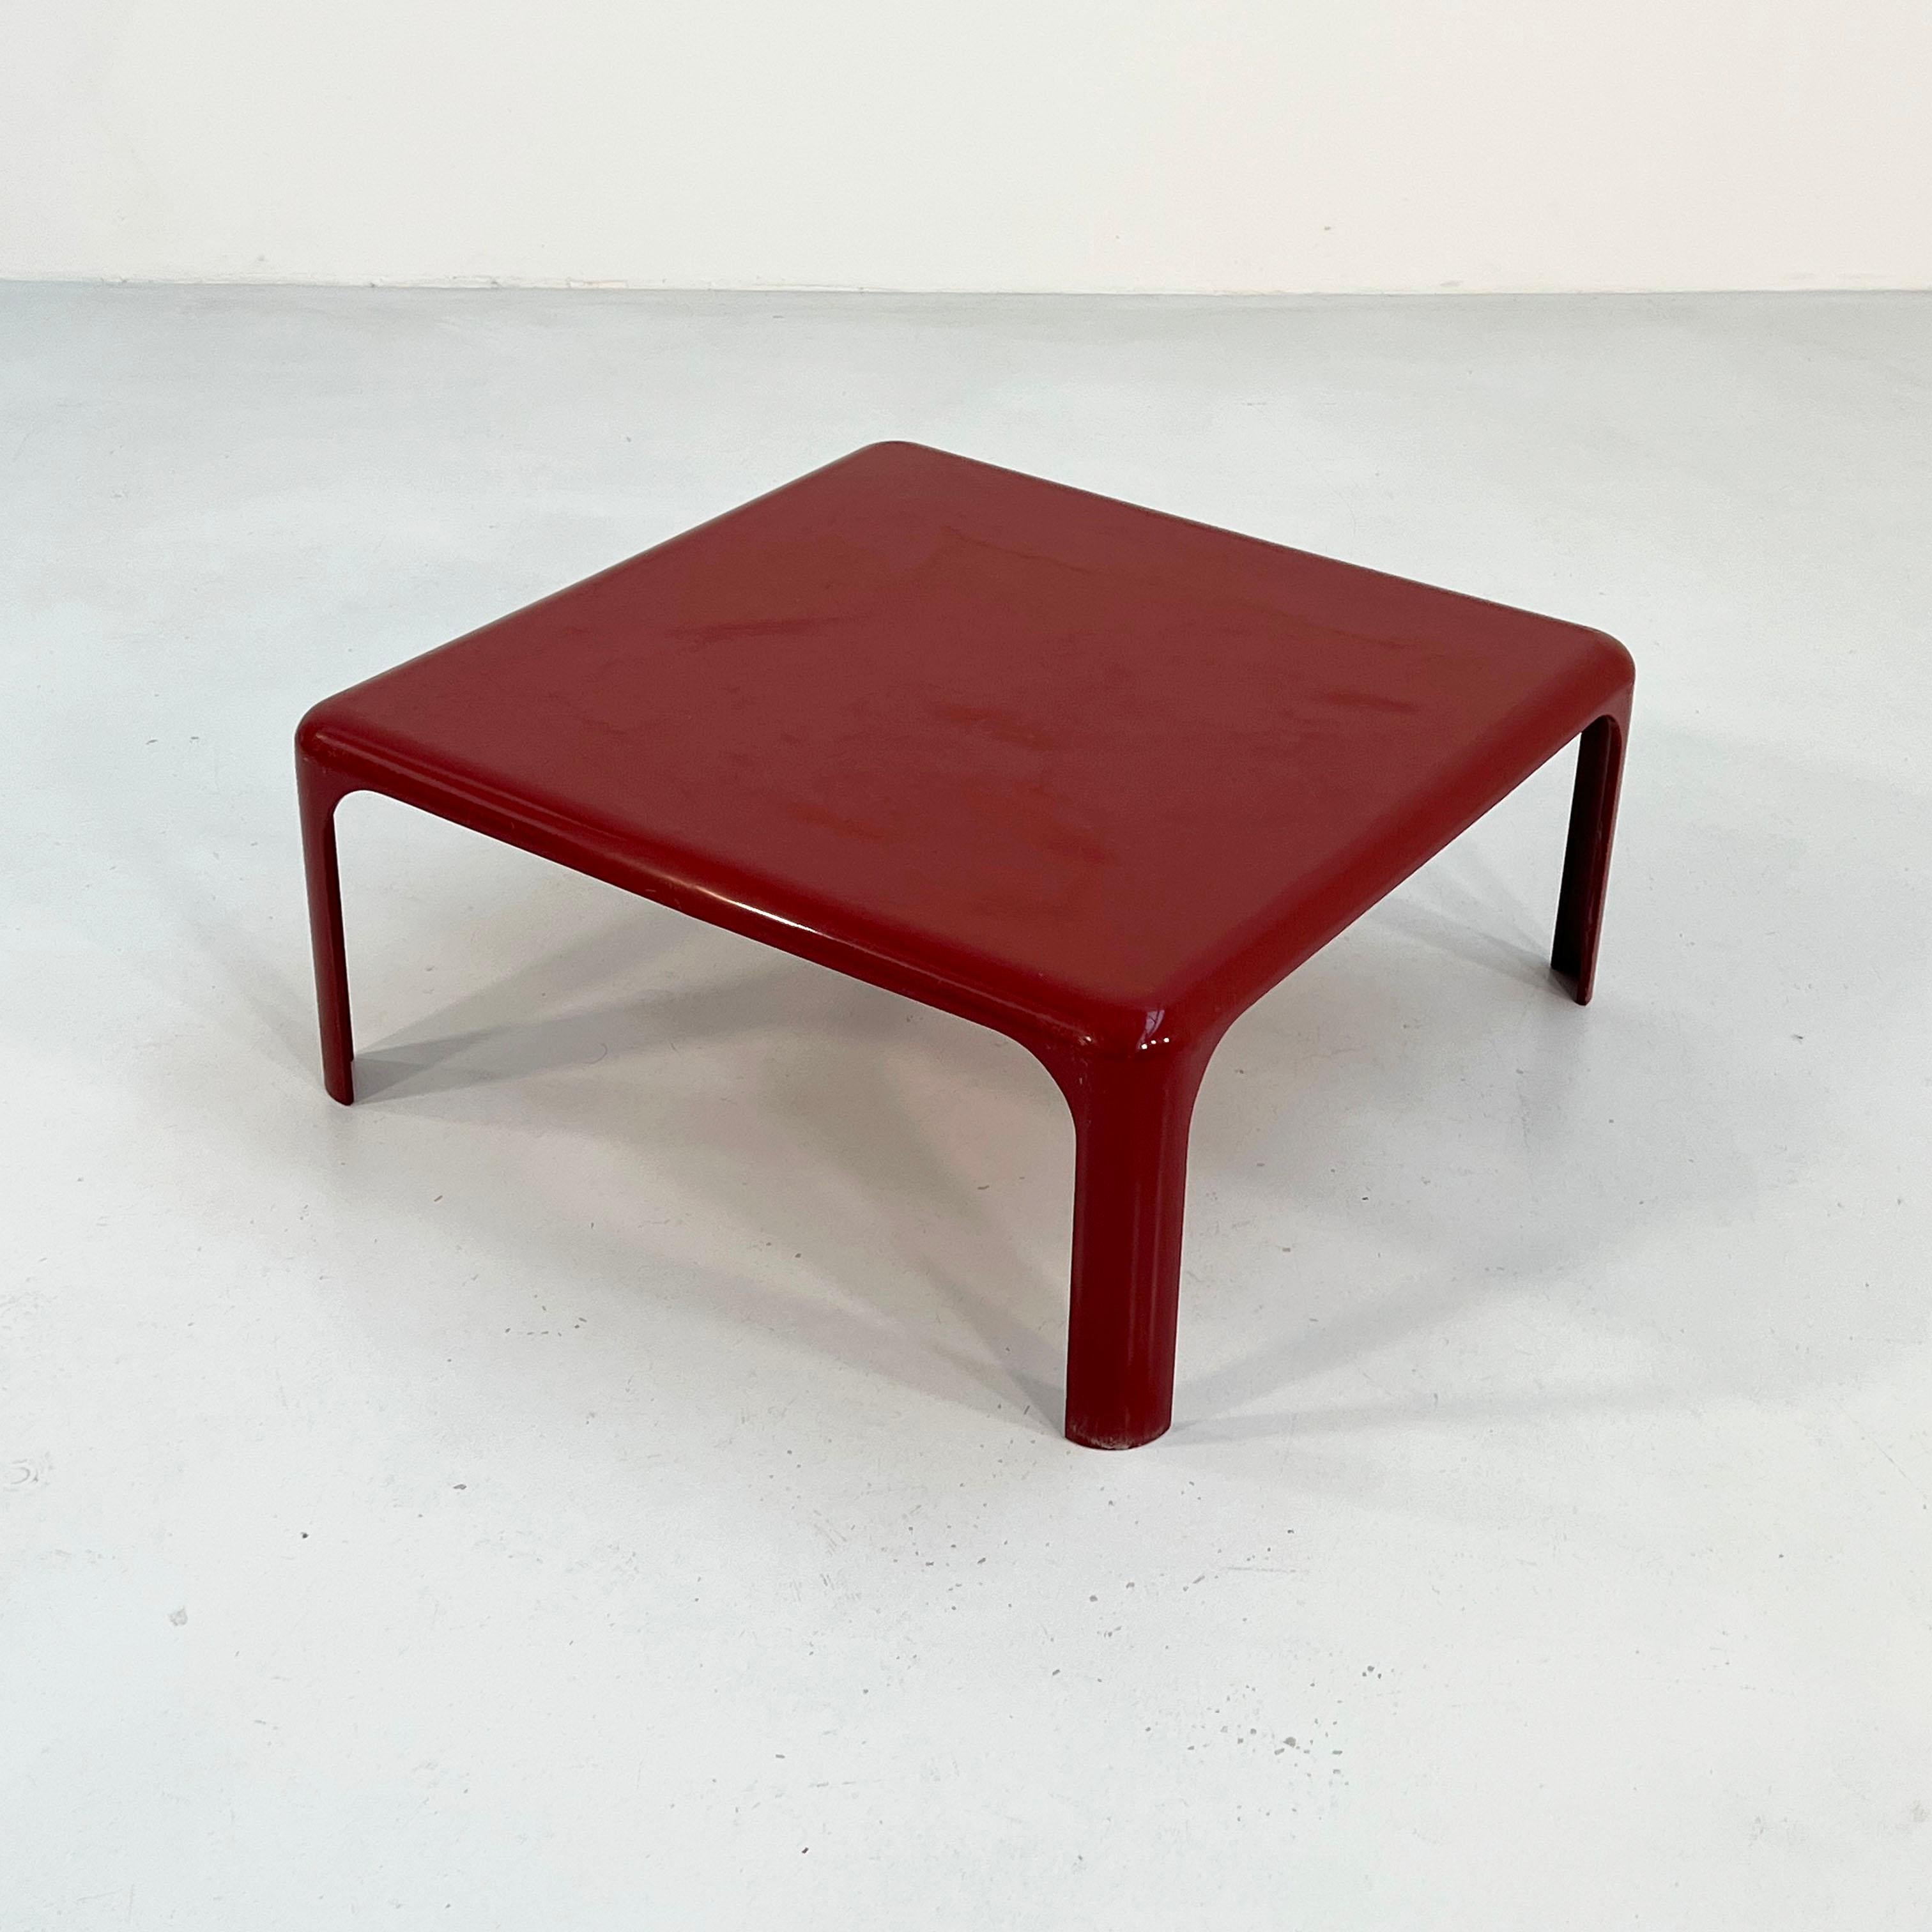 Designer - Vico Magistretti
Producer - Artemide
Model - Demetrio 70 Coffee Table 
Design Period - Sixties 
Measurements - Width 70 cm x Depth 70 cm x Height 30 cm
Materials - Plastic
Color - Burgundy
Light wear consistent with age and use. One small